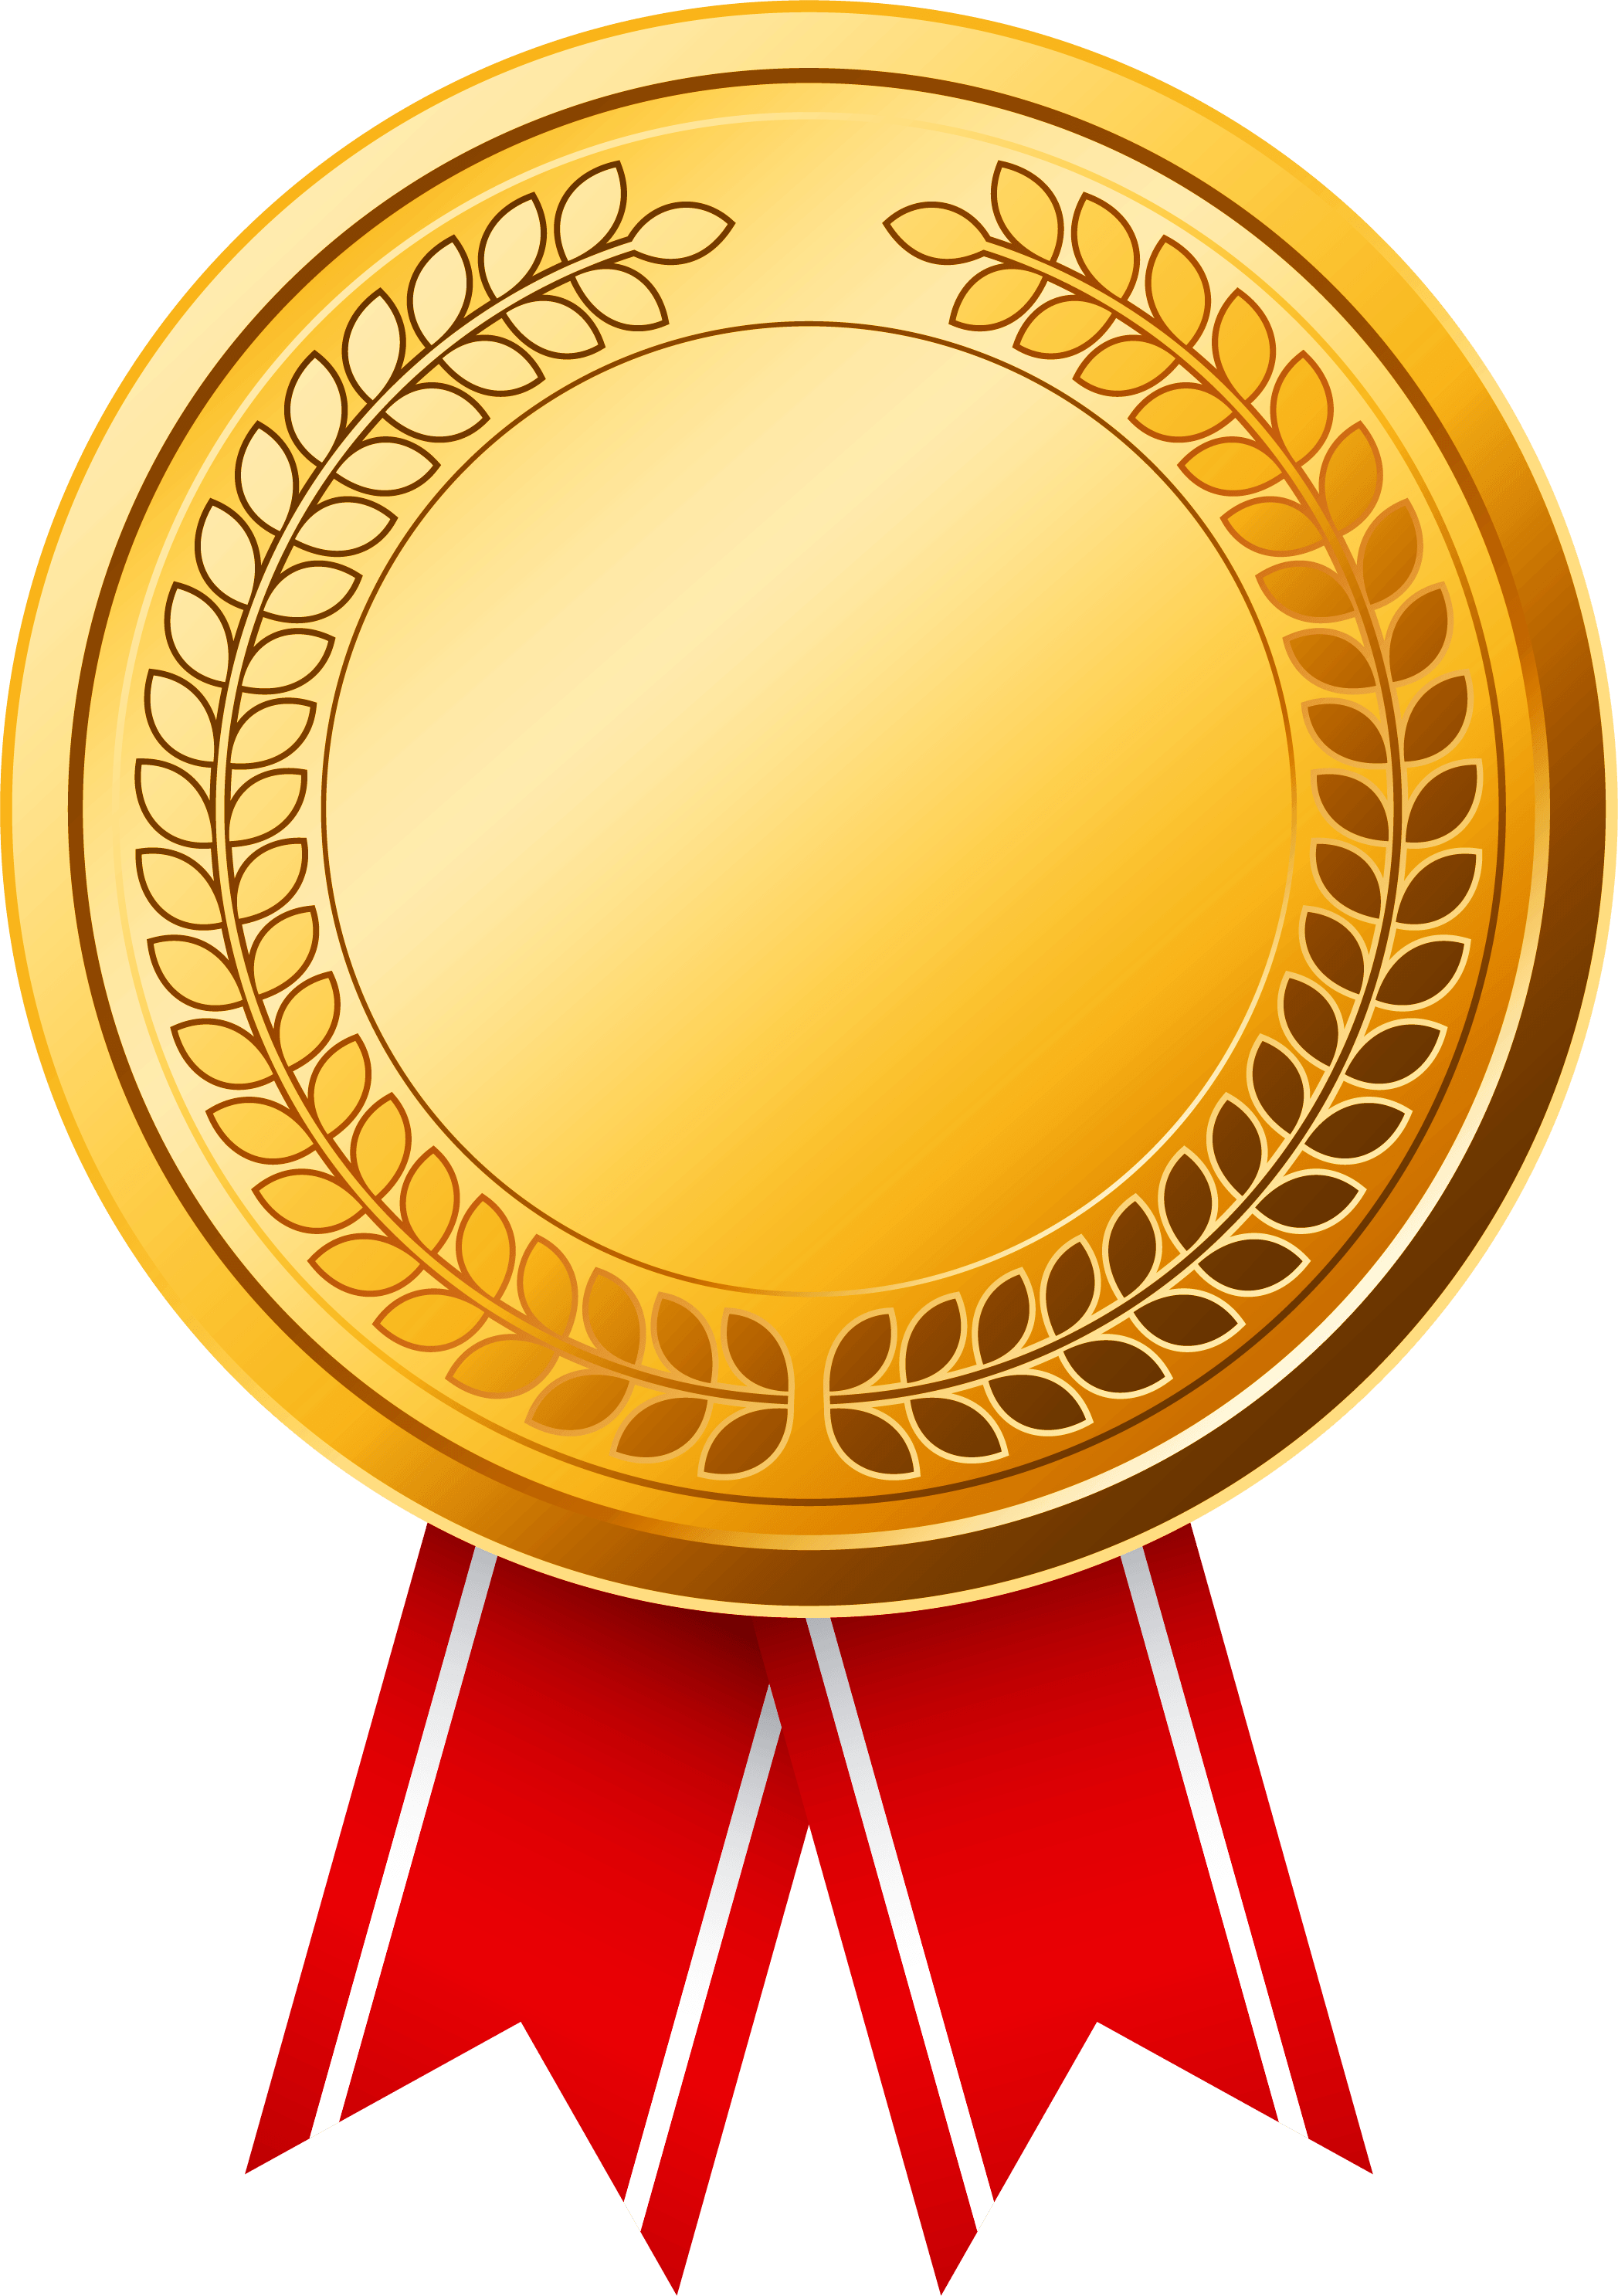 Medal PNG, Gold Medal, Olympic Medals, Medal Ribbon Clipart Free